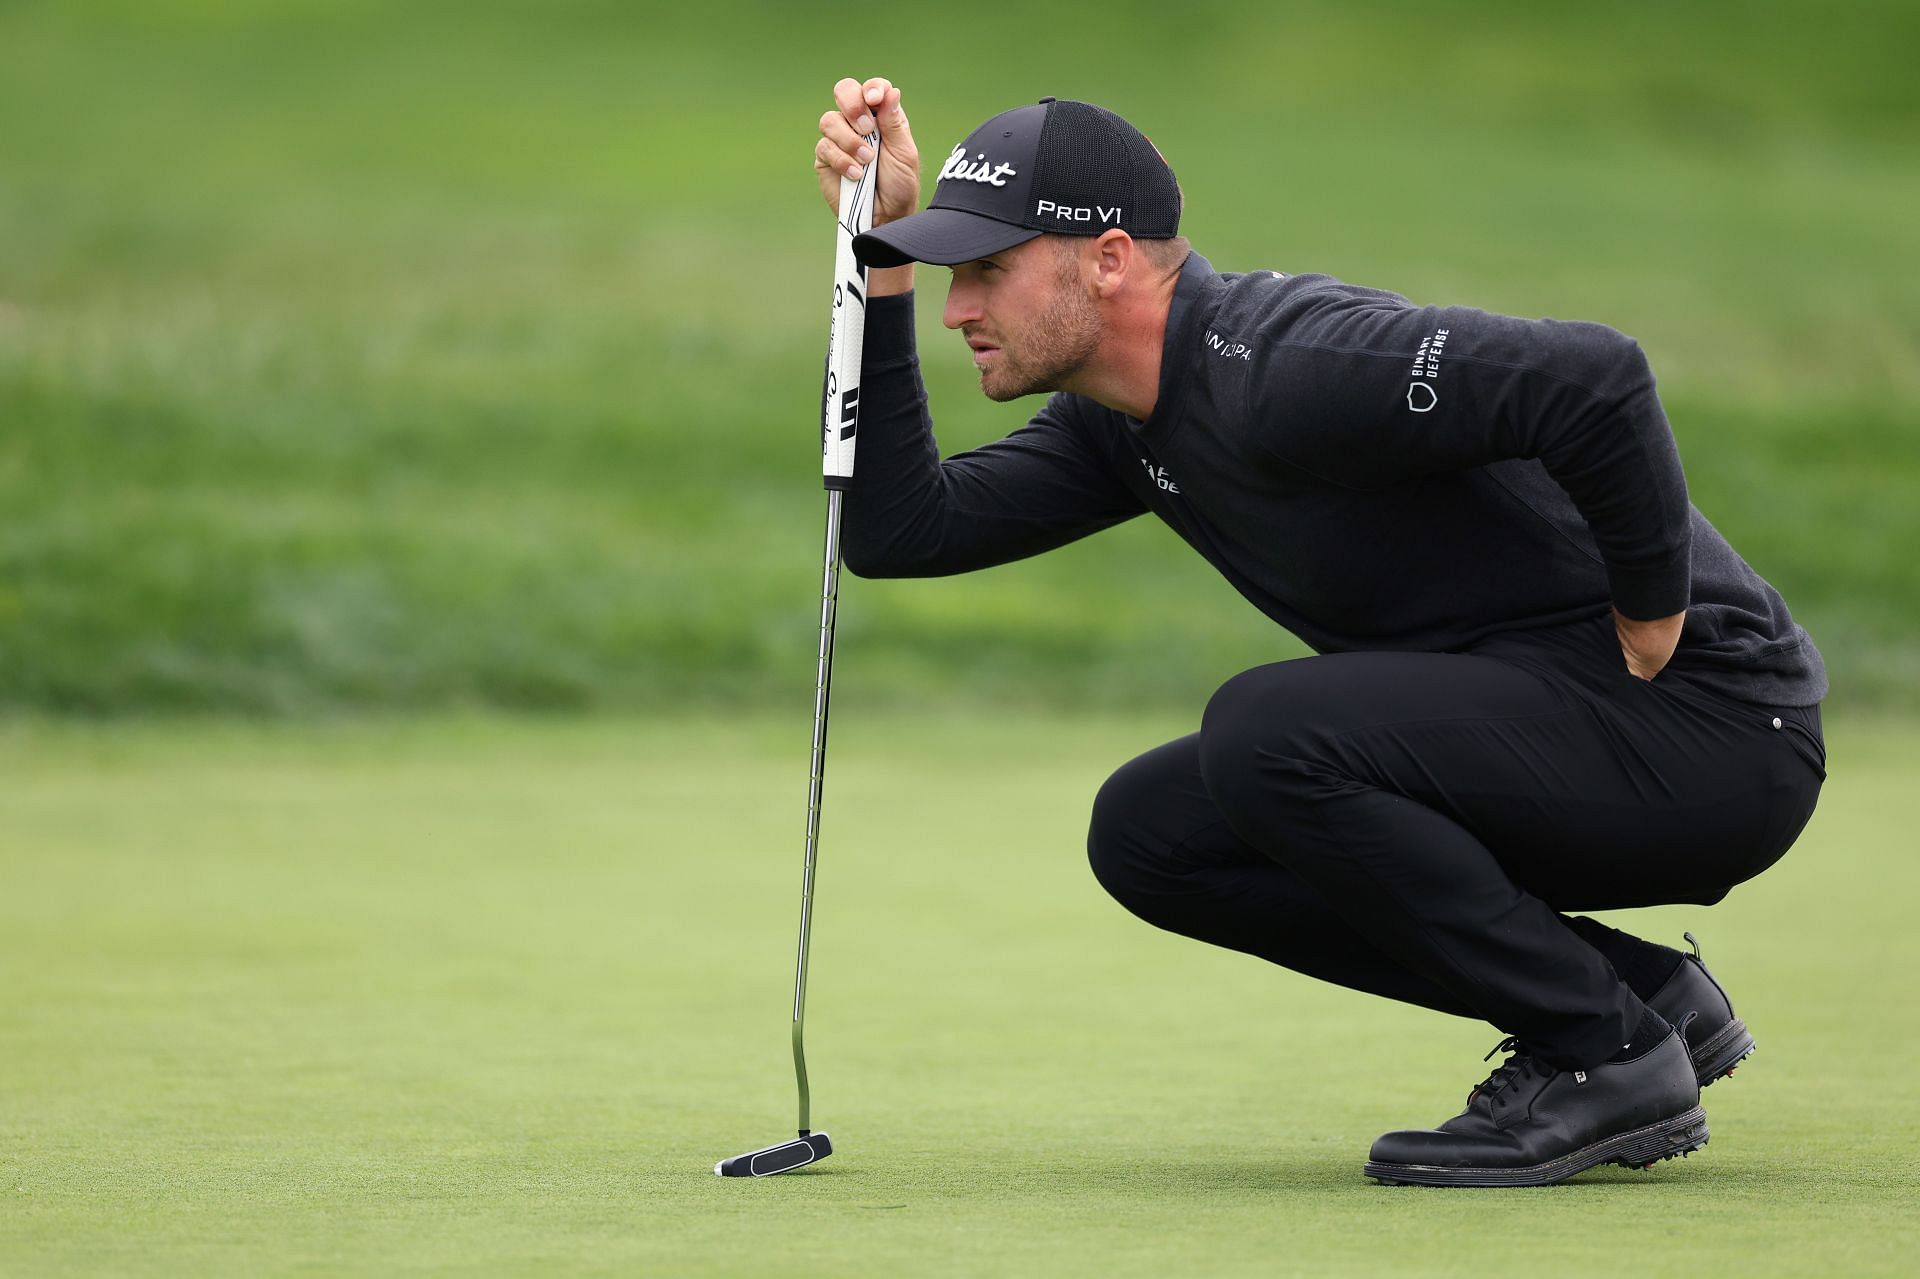 Wyndham Clark leads after three rounds of AT&amp;T Pebble Beach Pro-Am